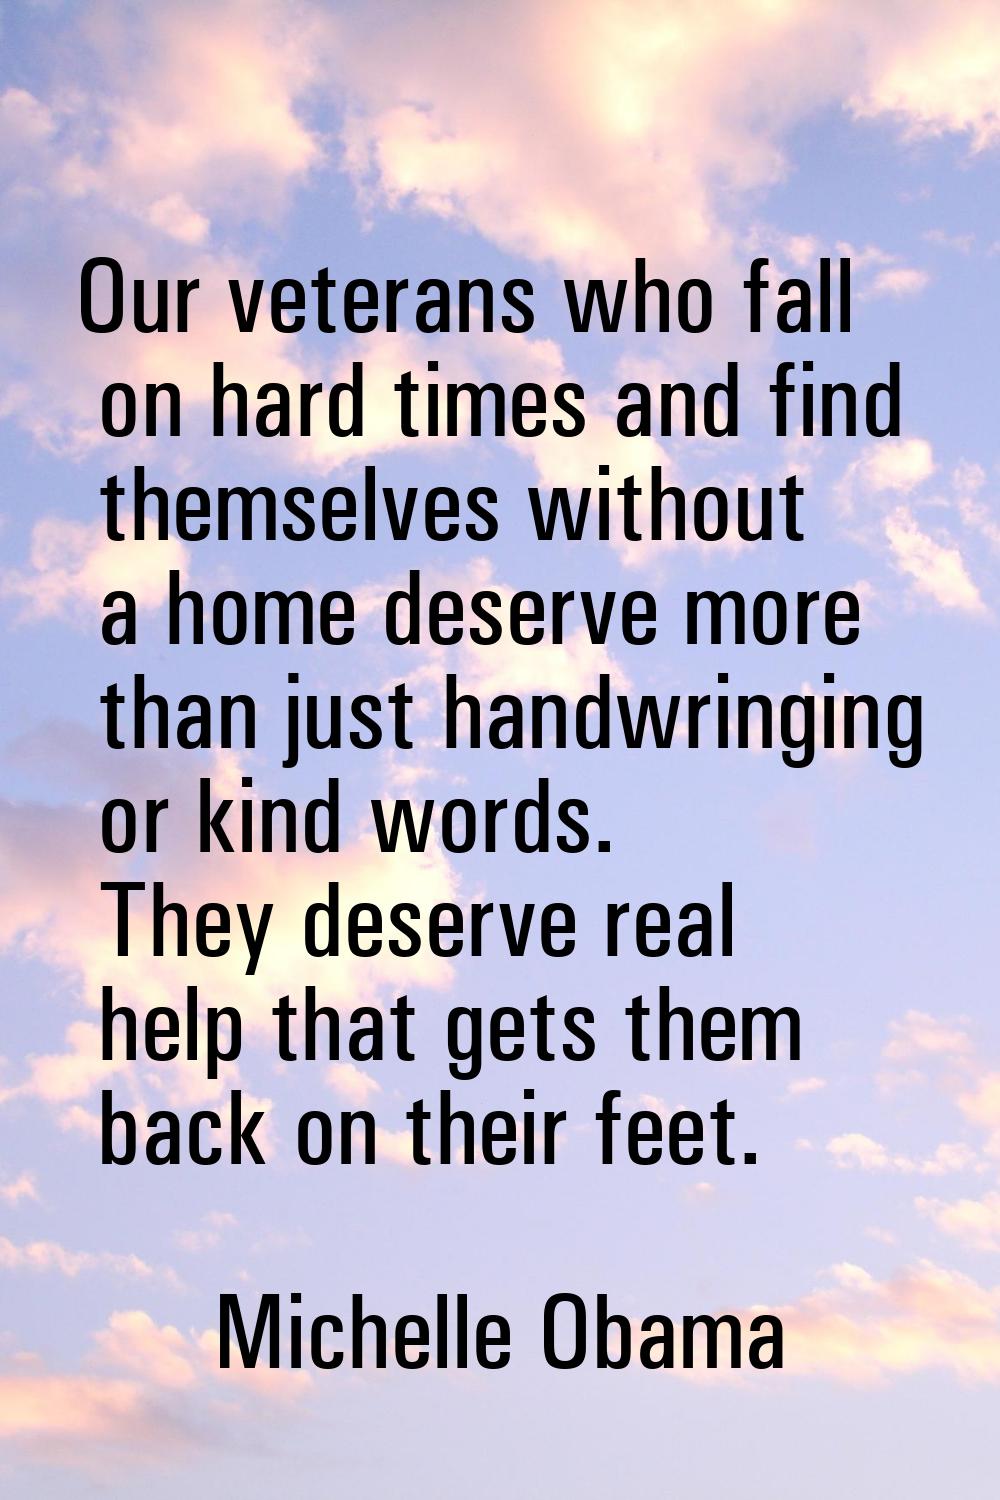 Our veterans who fall on hard times and find themselves without a home deserve more than just handw